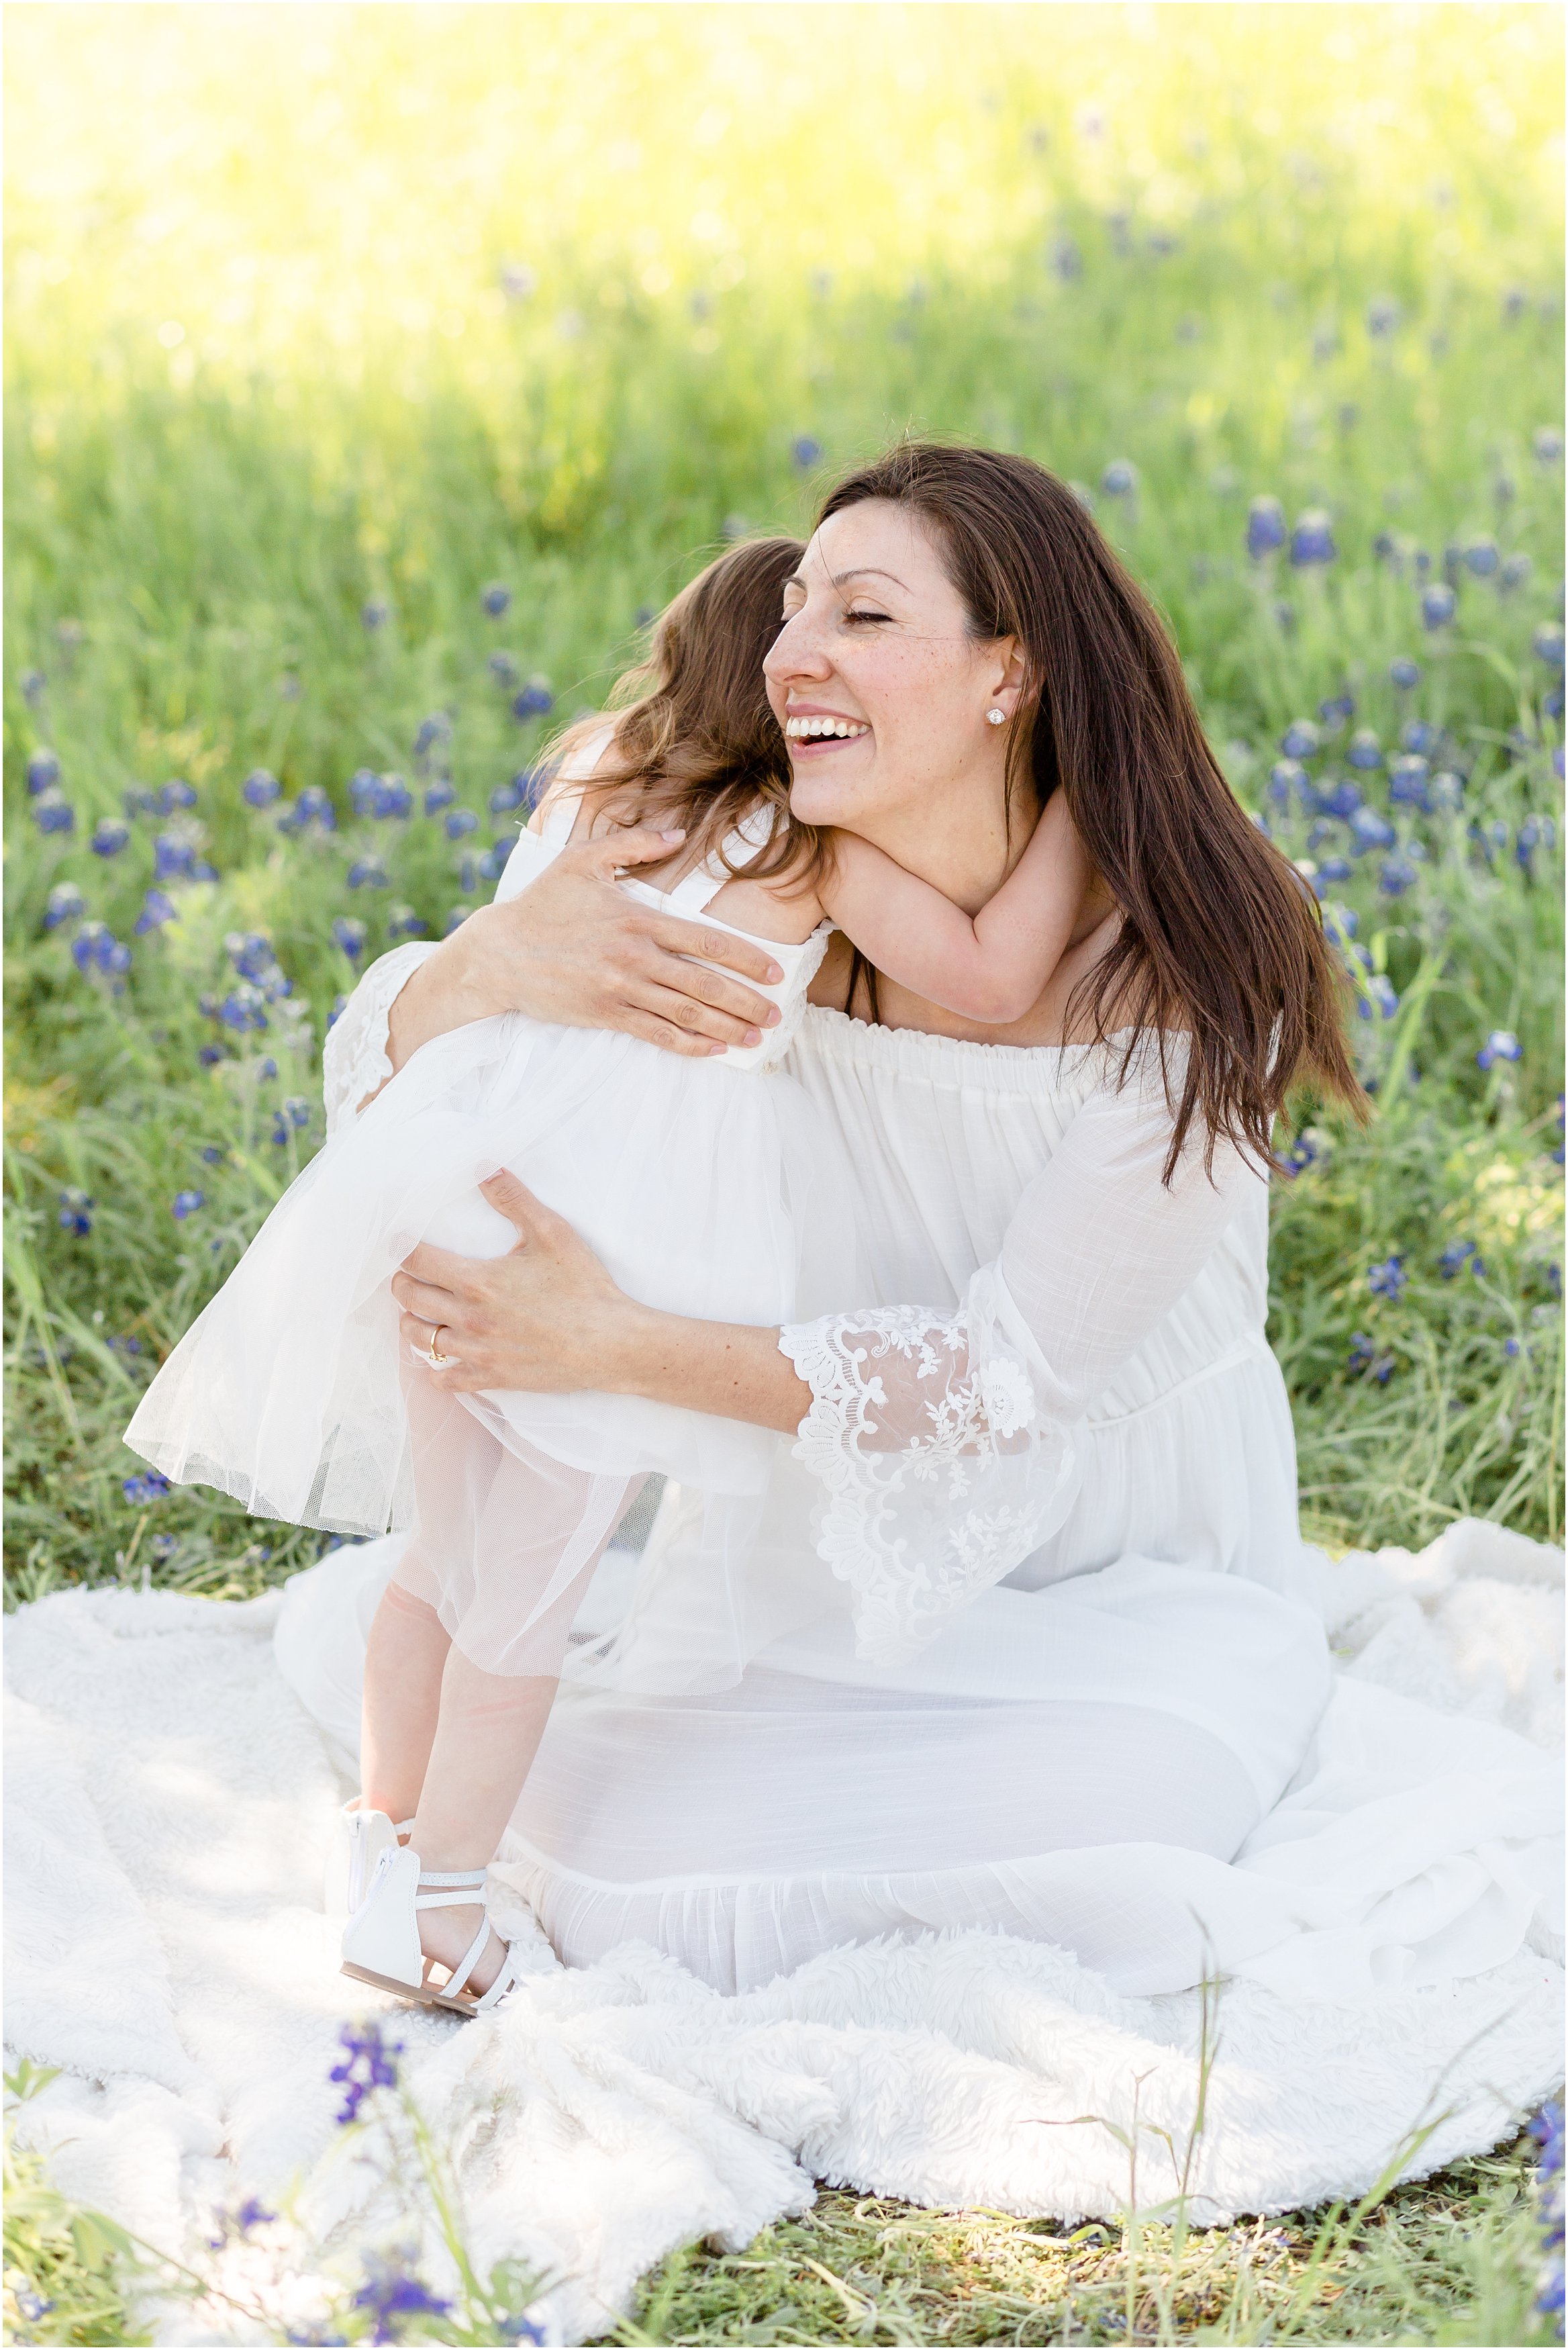 mom and daughter in white dresses in a bluebonnet field